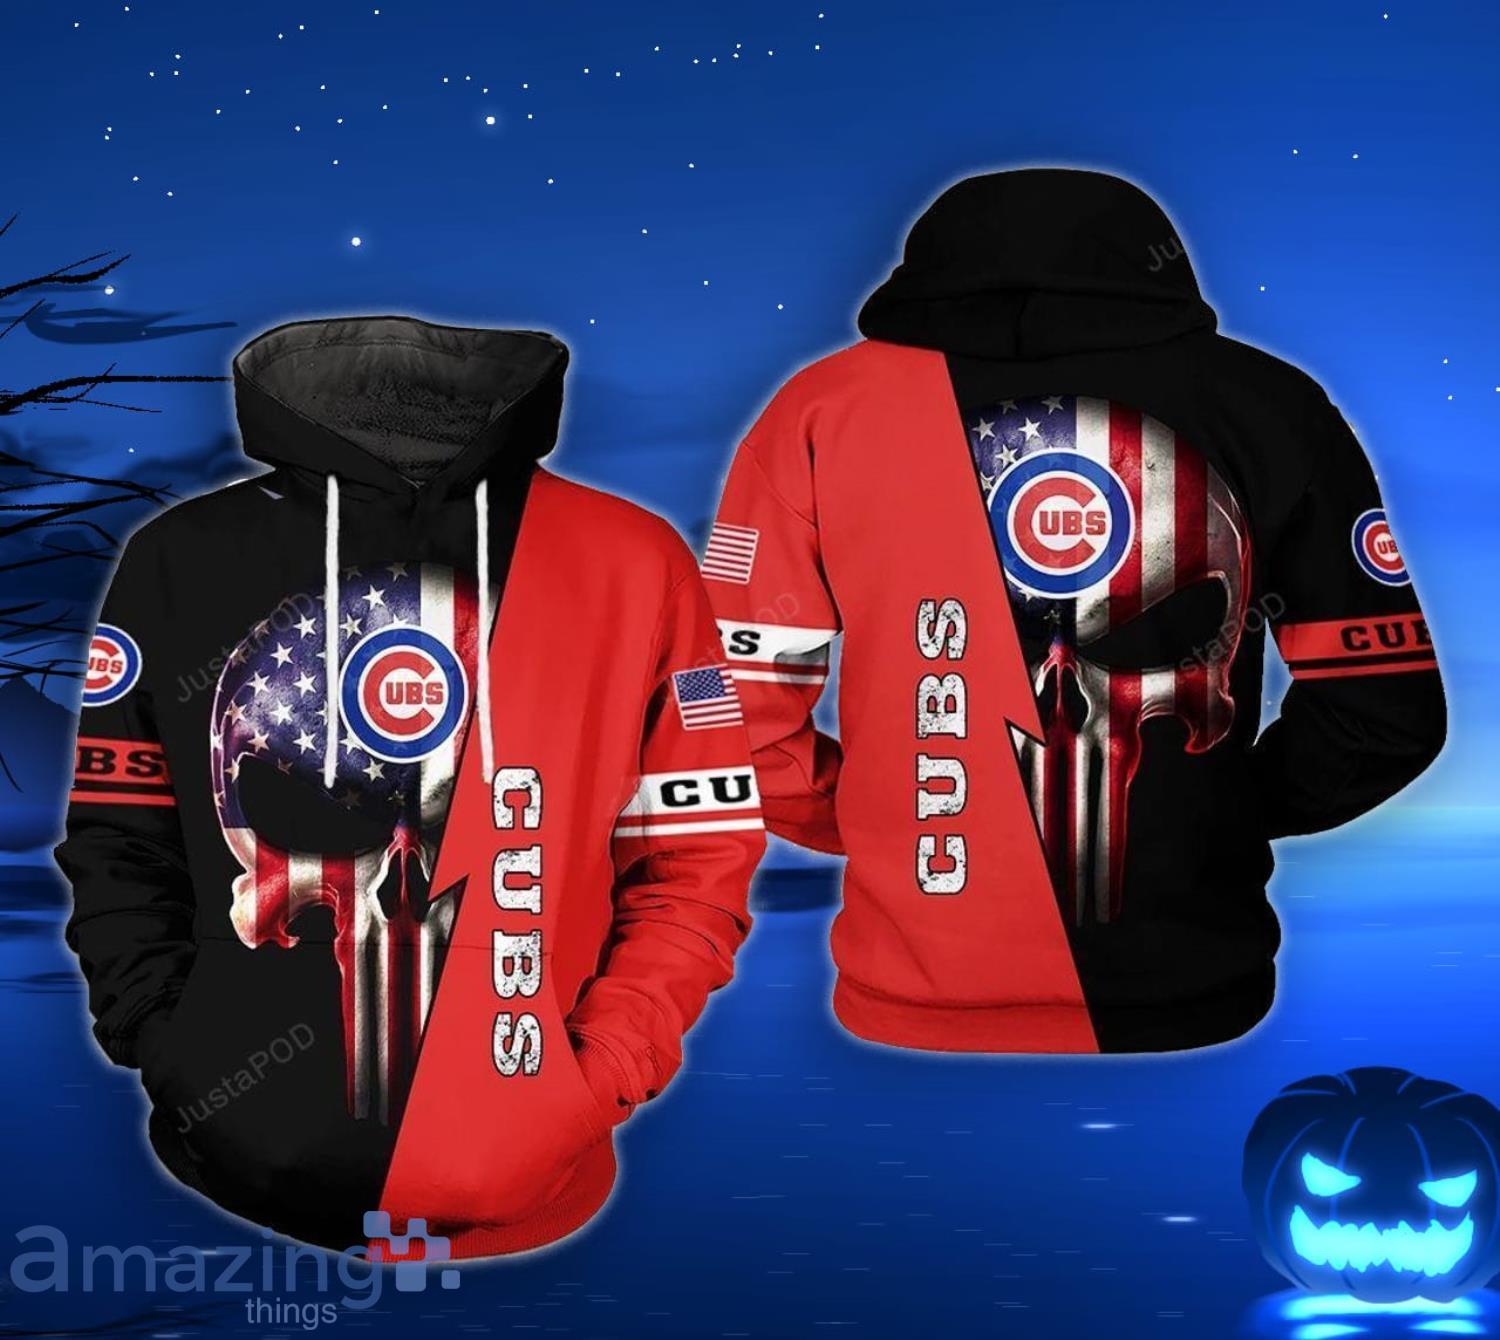 Chicago Cubs Custom New Uniforms For Fan Gear Unisex Men And Women 3D  Sweater - Freedomdesign